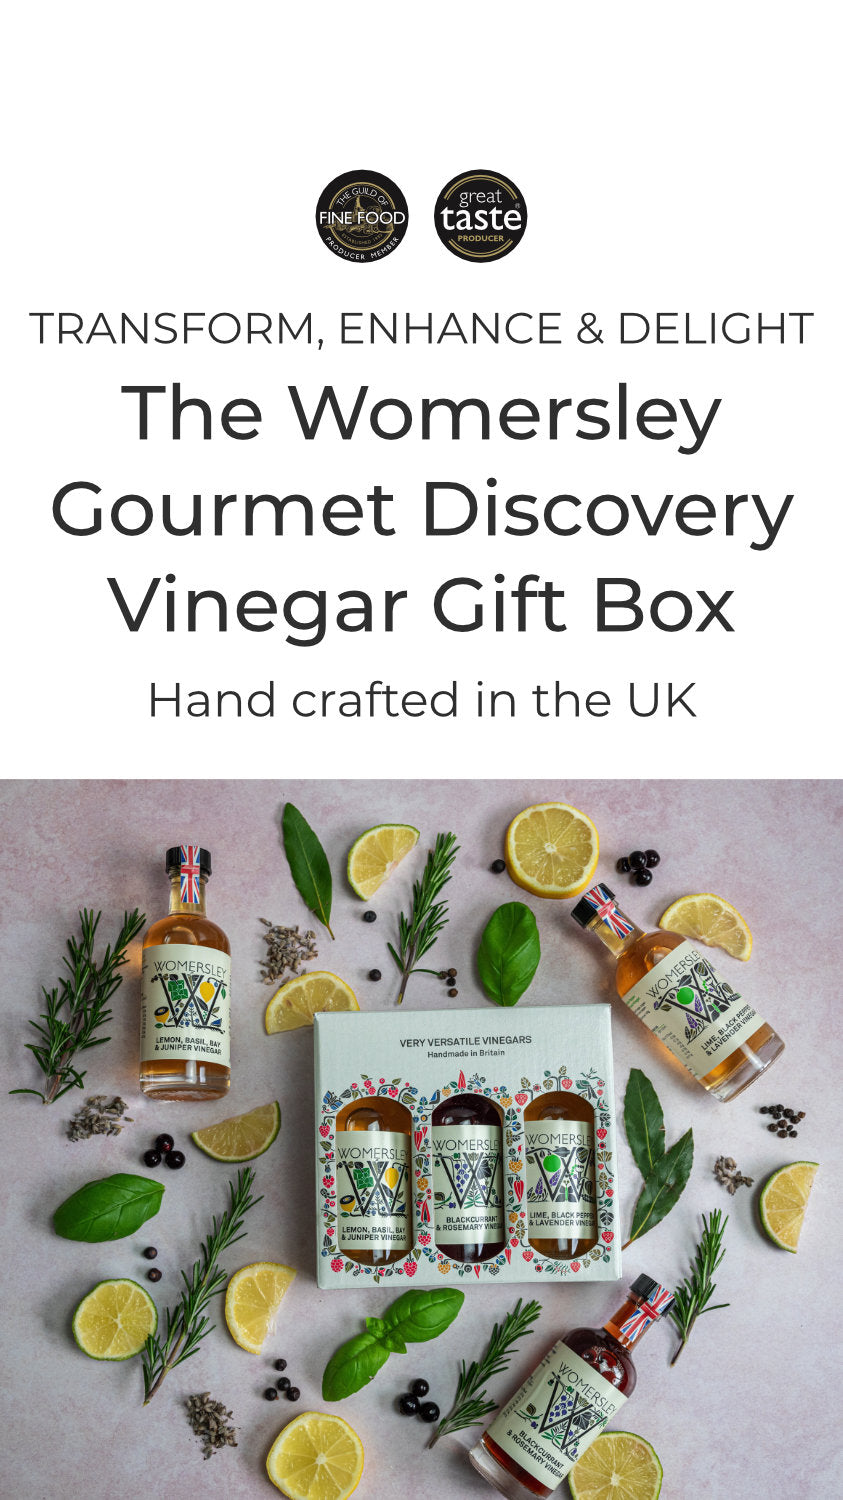 Transform, Enhance & Delight. The Womersley Gourmet discovery Vinegar gift box. Hand crafted in the UK.